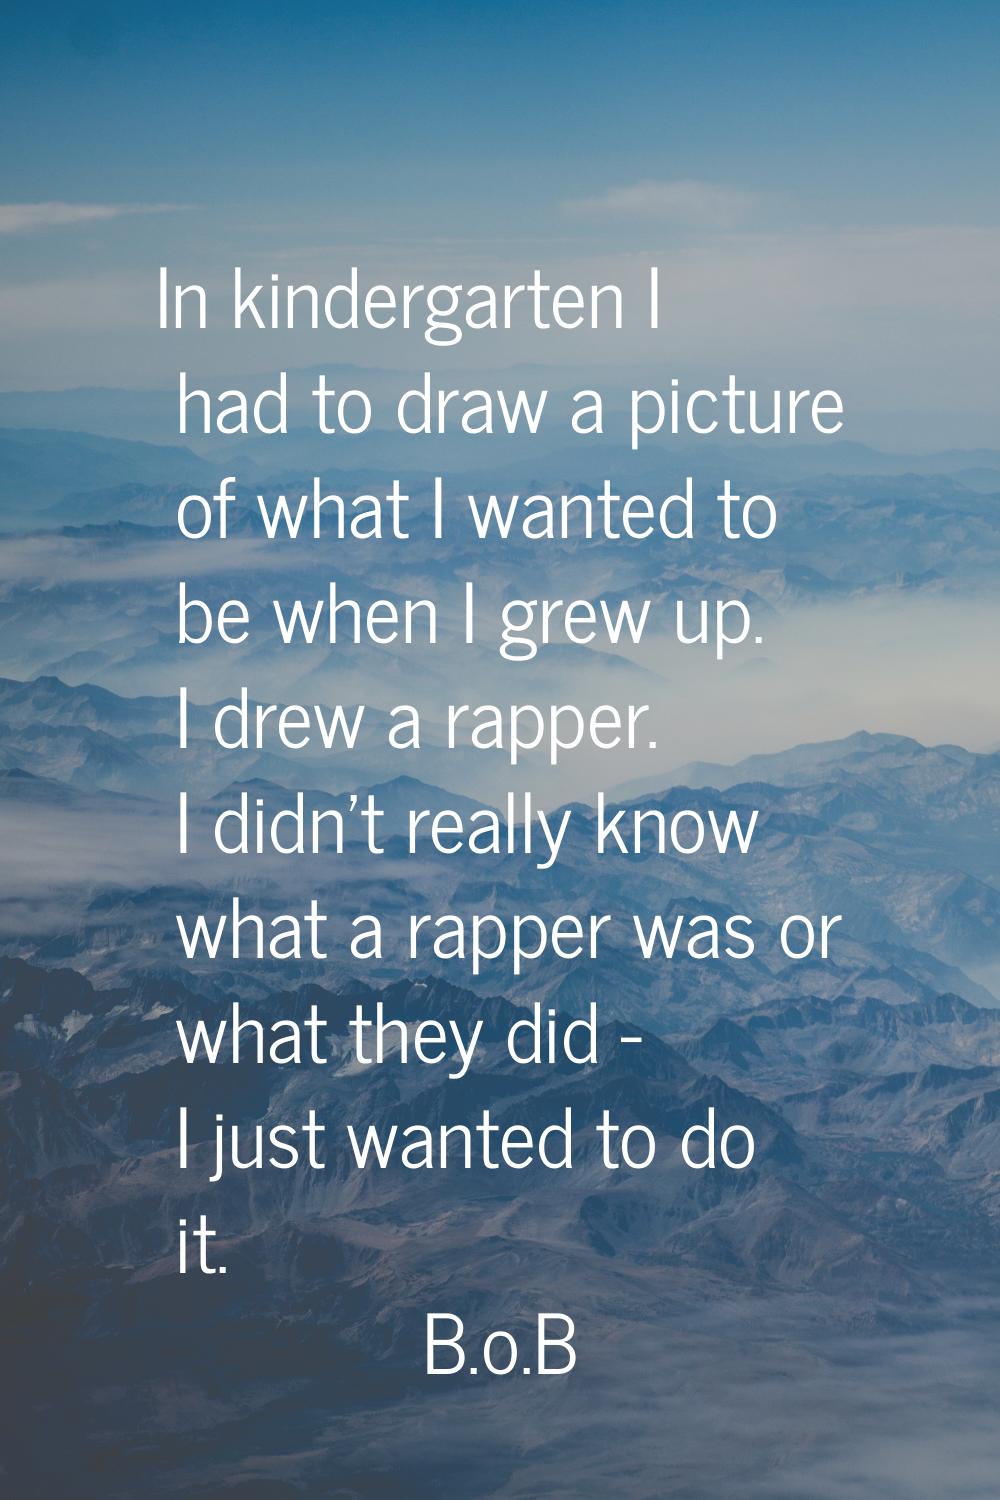 In kindergarten I had to draw a picture of what I wanted to be when I grew up. I drew a rapper. I d